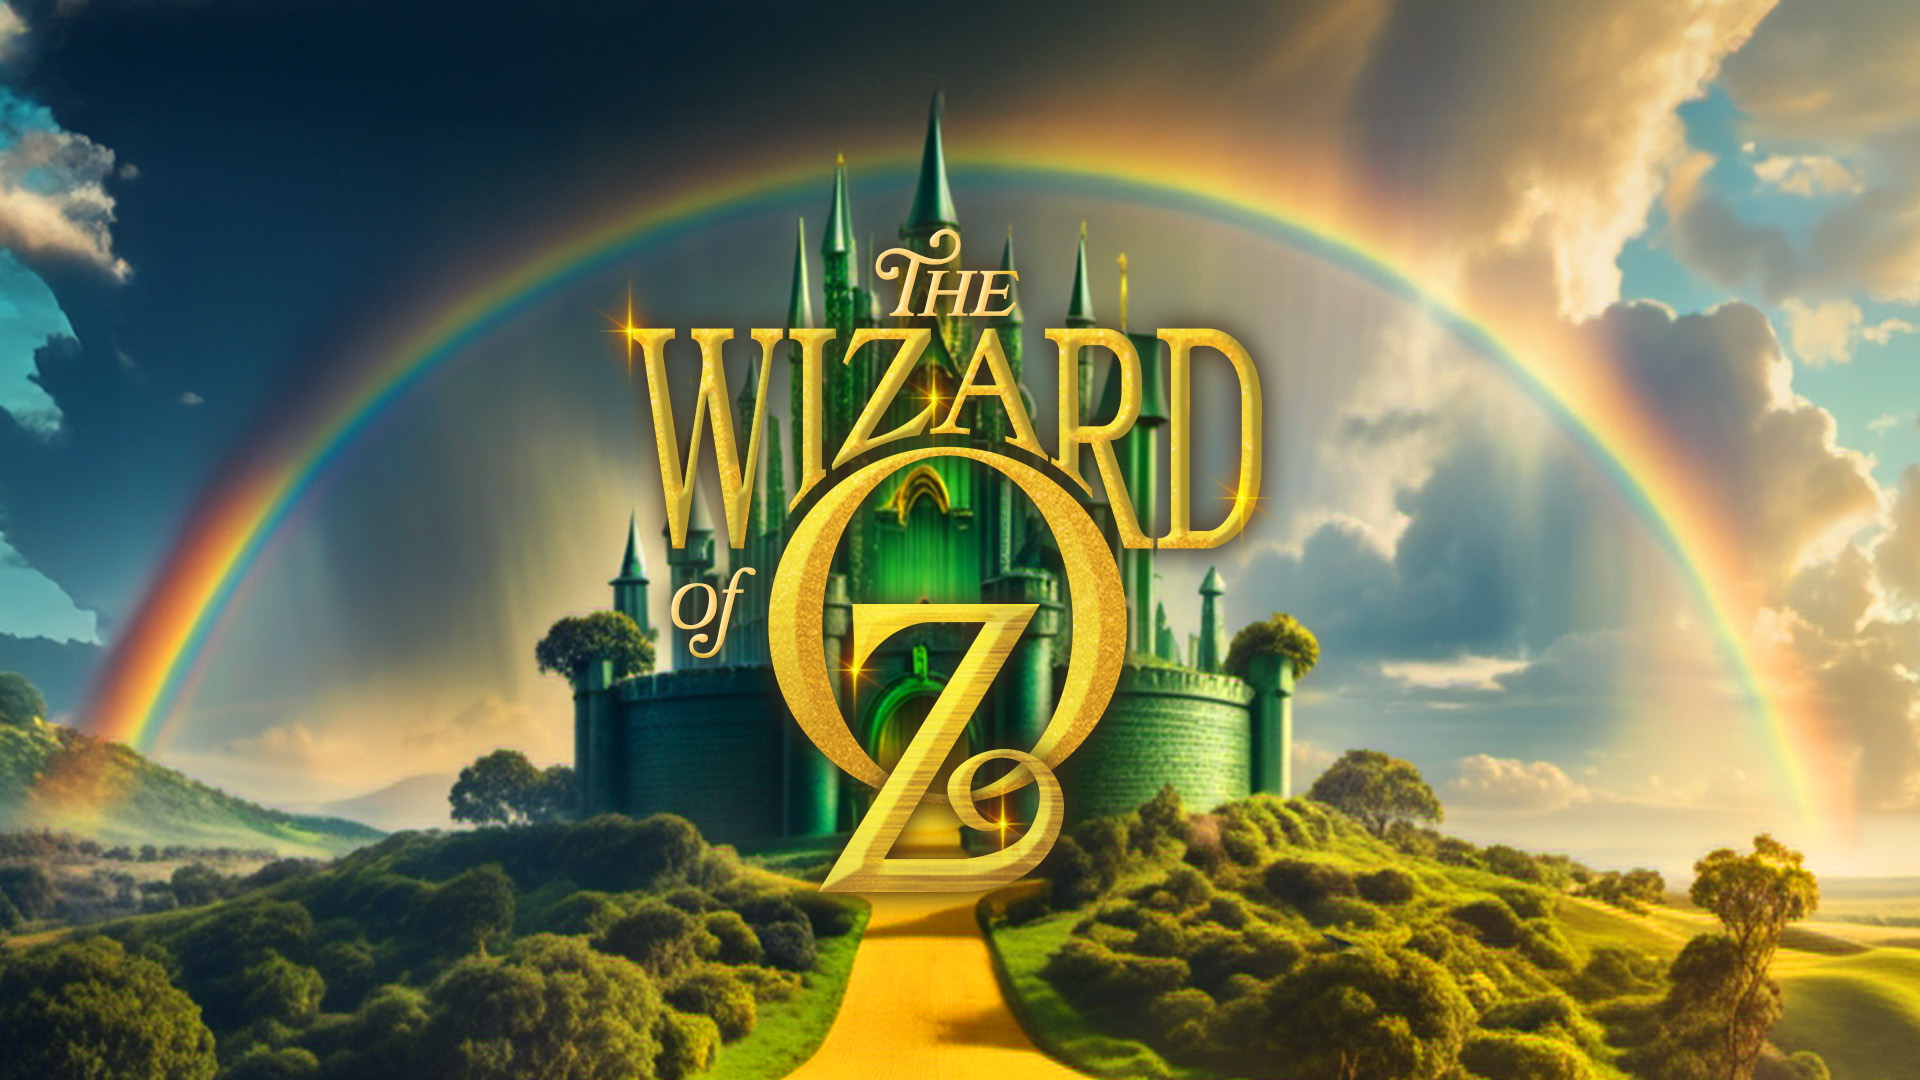 The Wizard of Oz

March 14 & 15 | 7:00pm
March 16 | 1:00pm
Faith Christian Academy | East Auditorium
